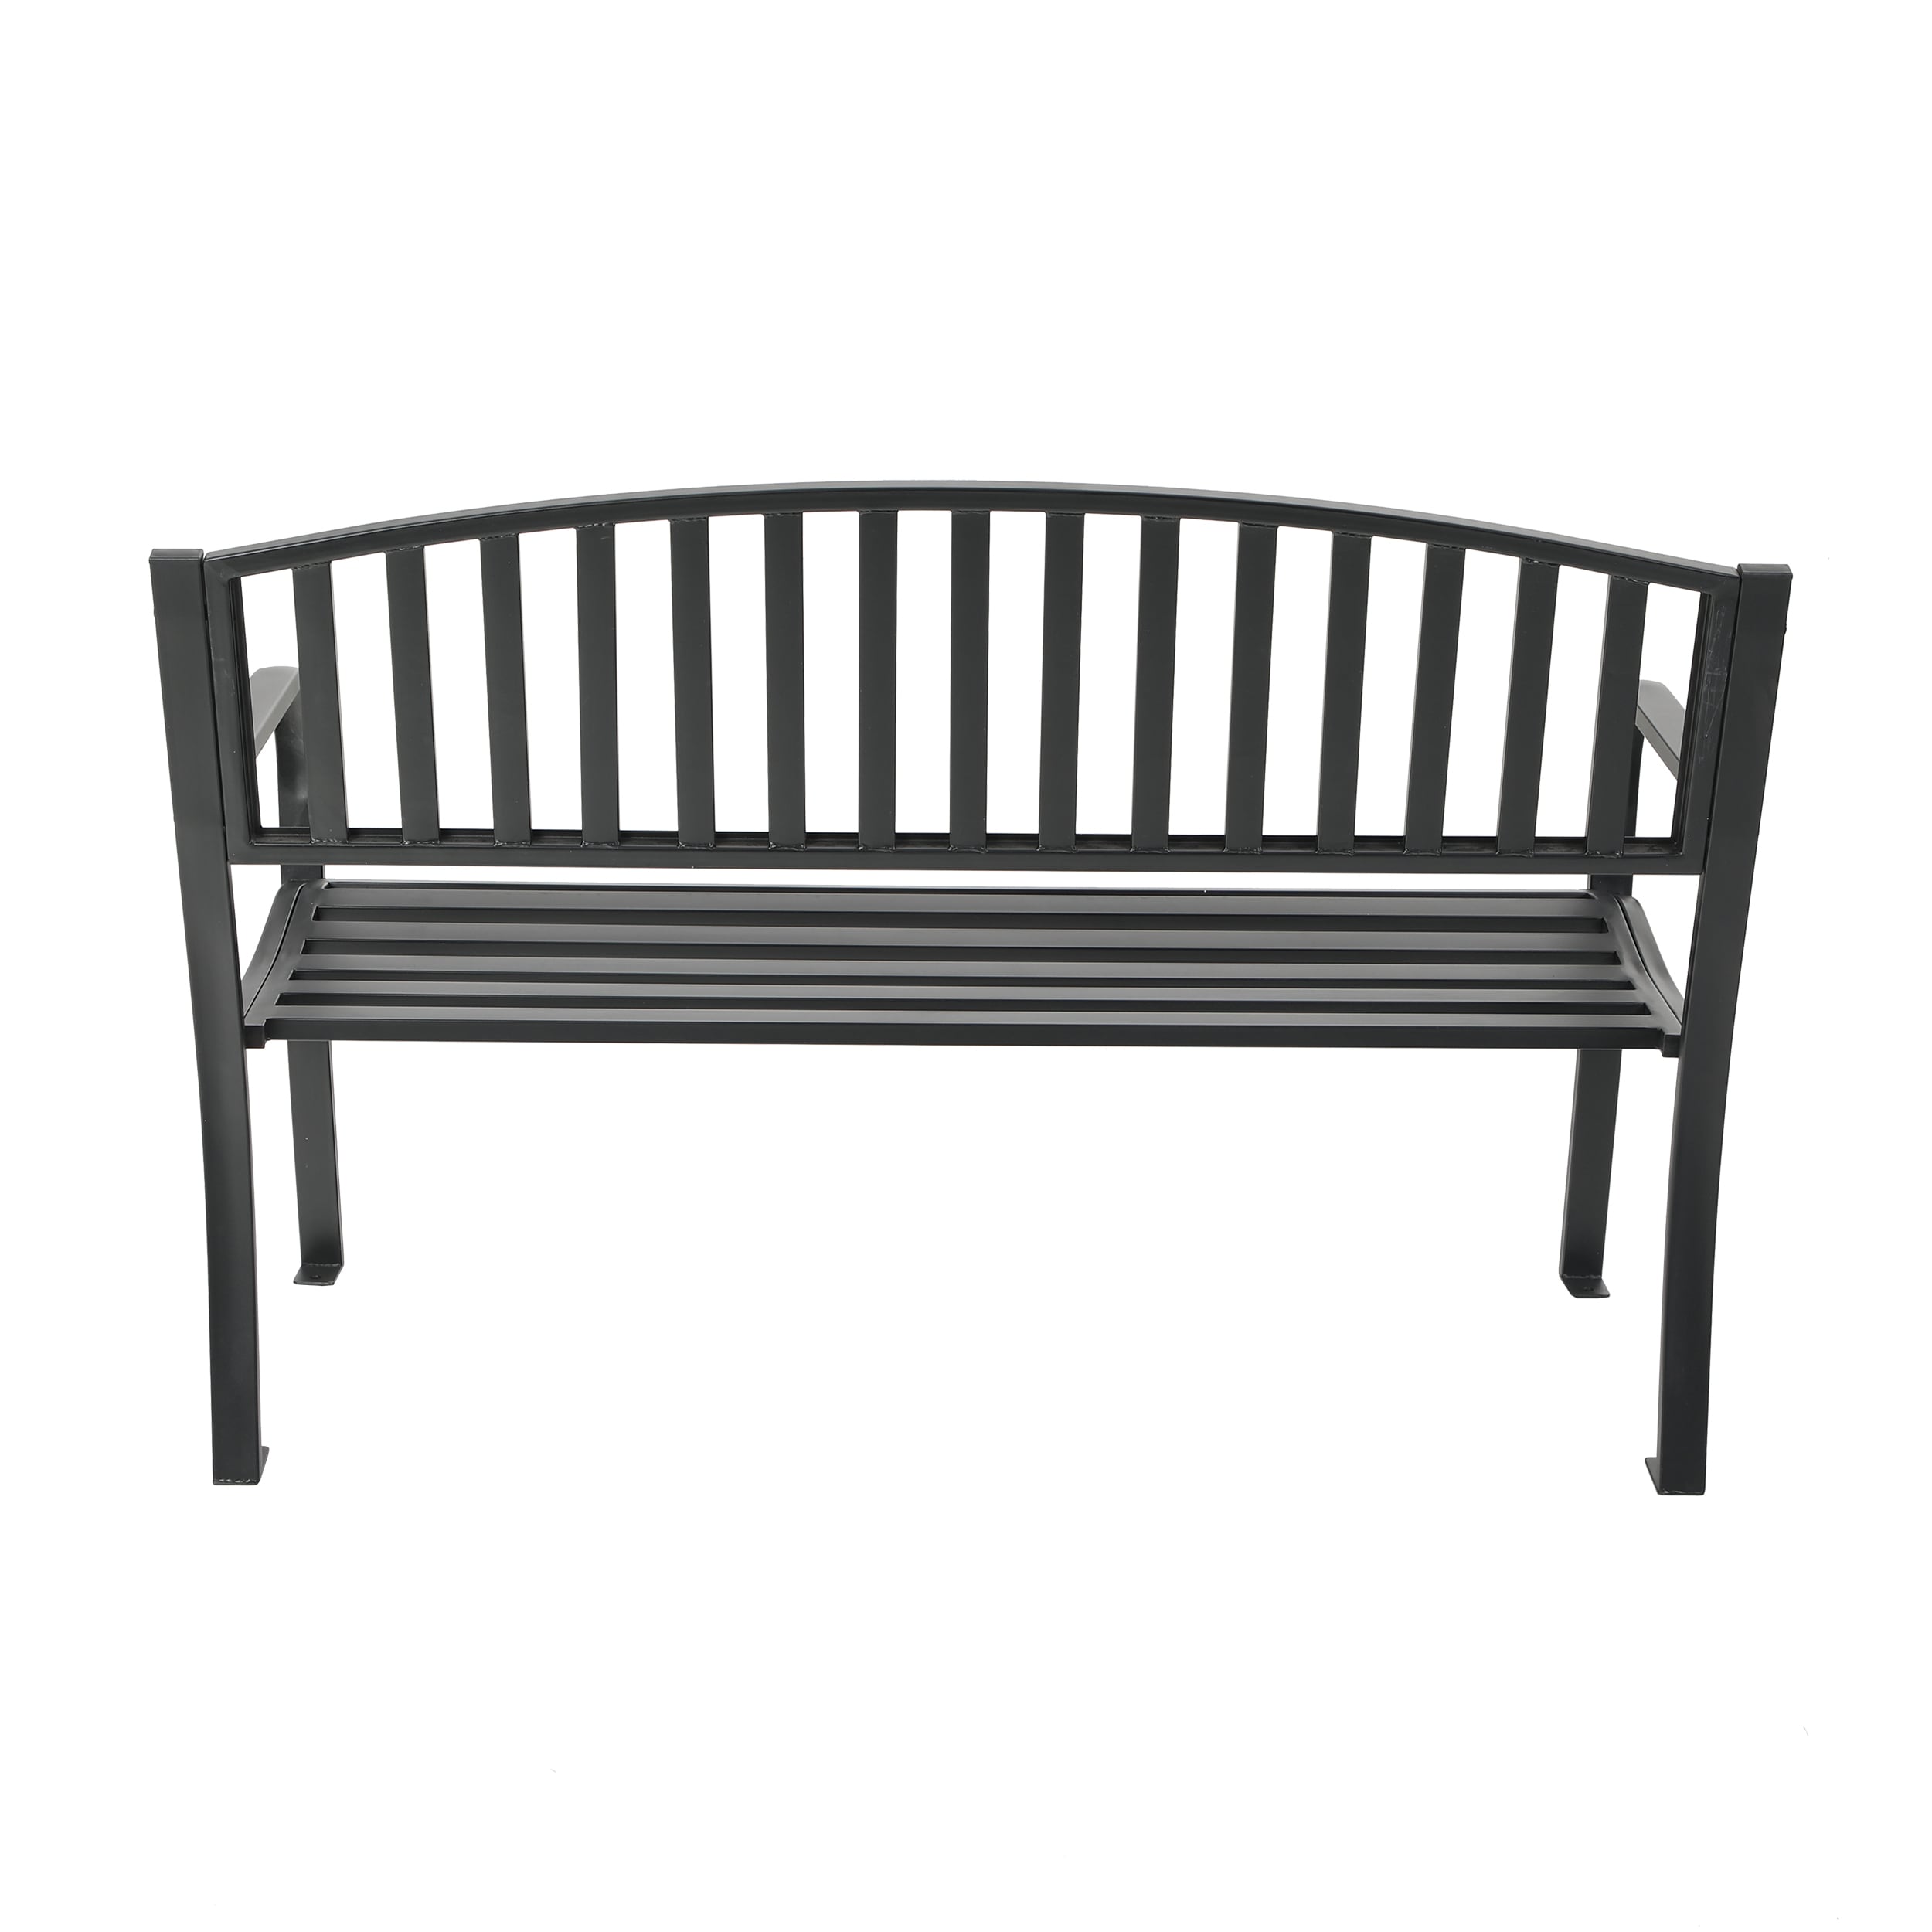 Outsunny Metal Garden Bench Black Outdoor Bench For People Park Style Patio Seating Decor With